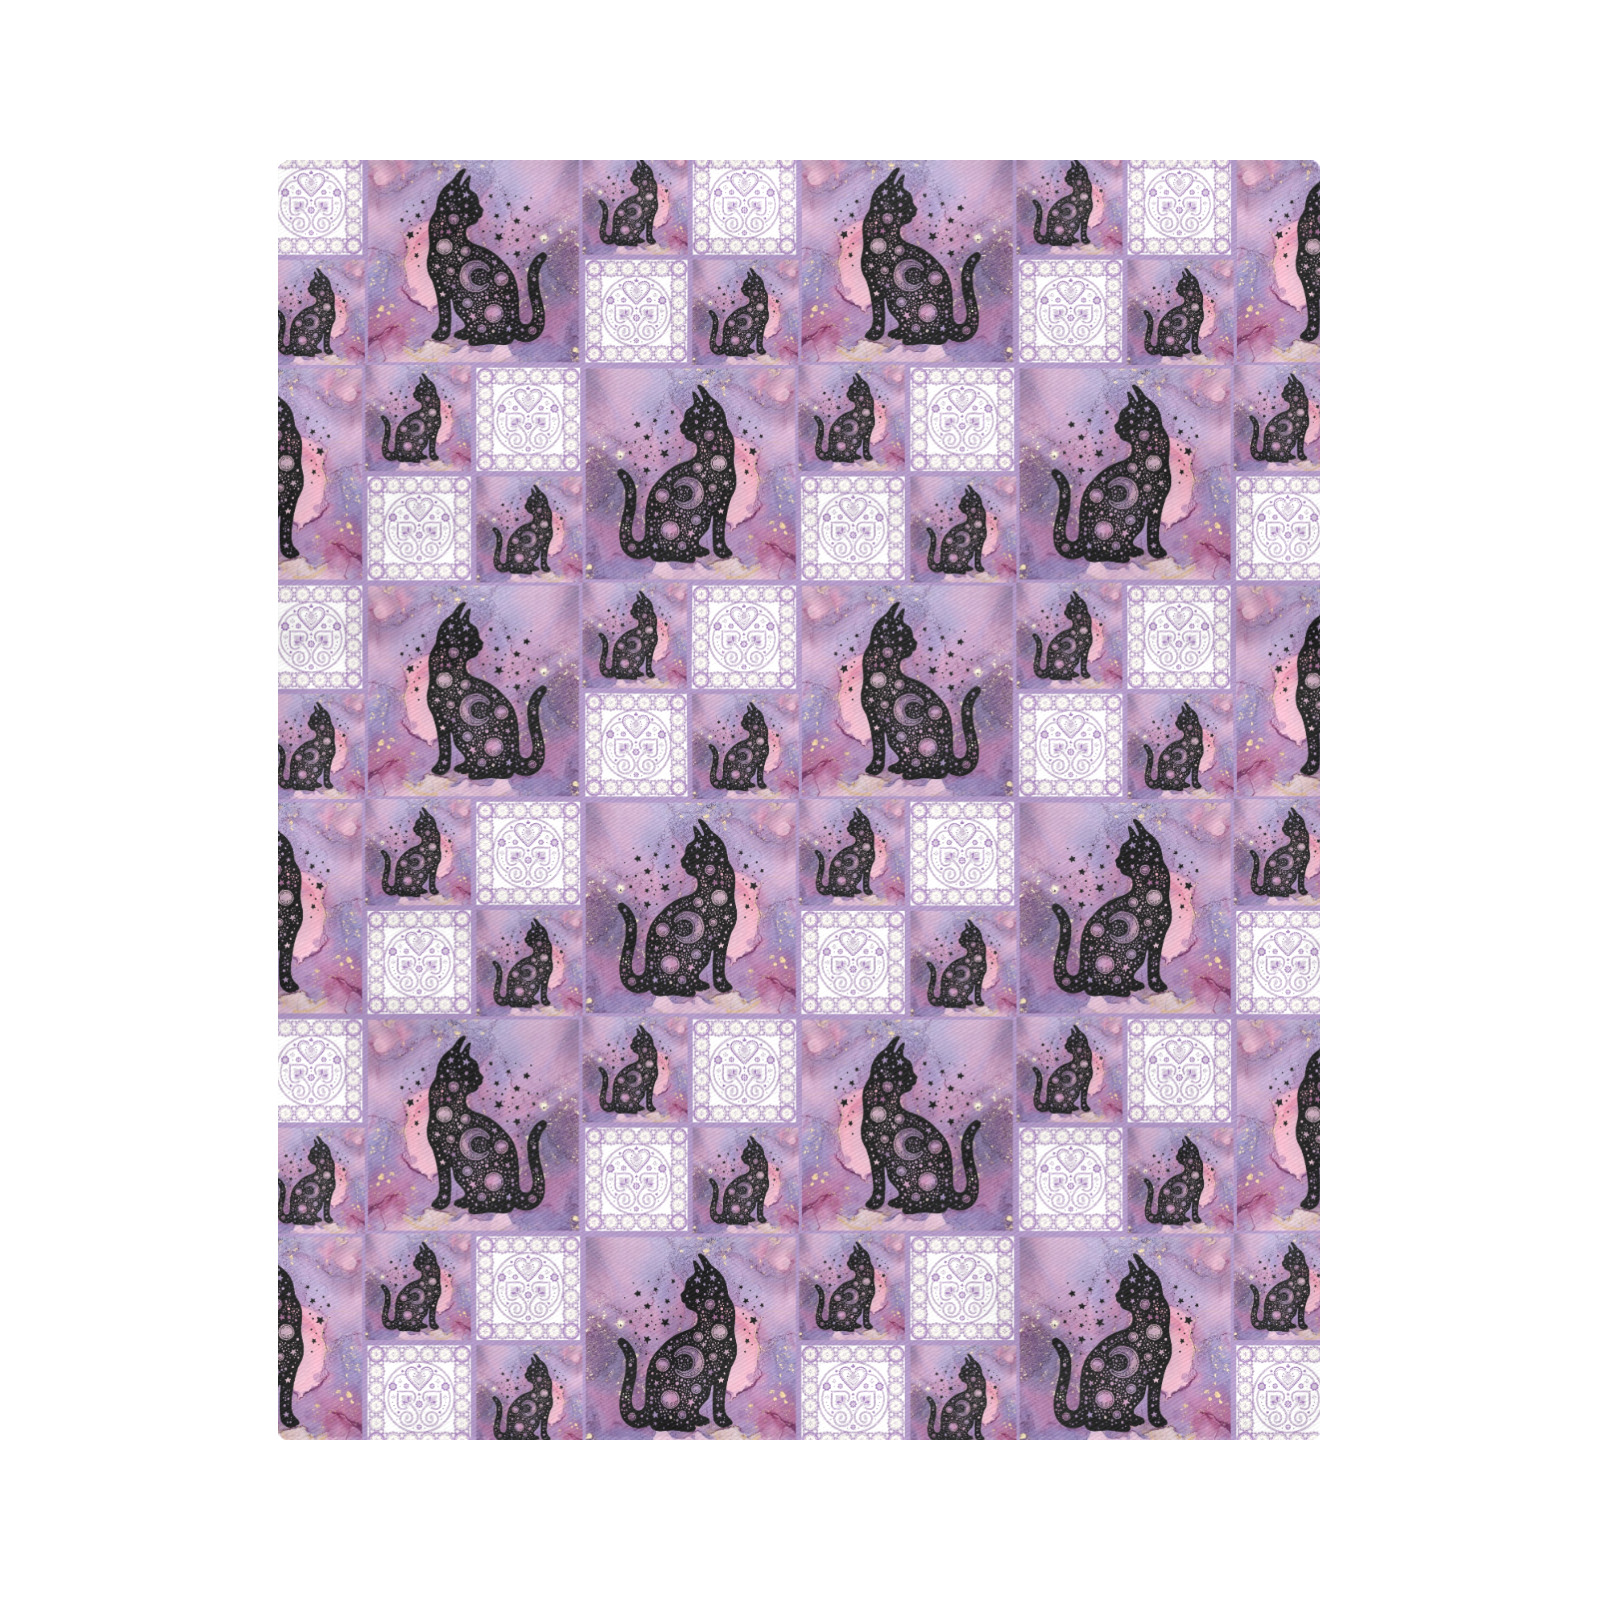 Purple Cosmic Cats Patchwork Pattern Duvet Cover 86"x70" ( All-over-print)